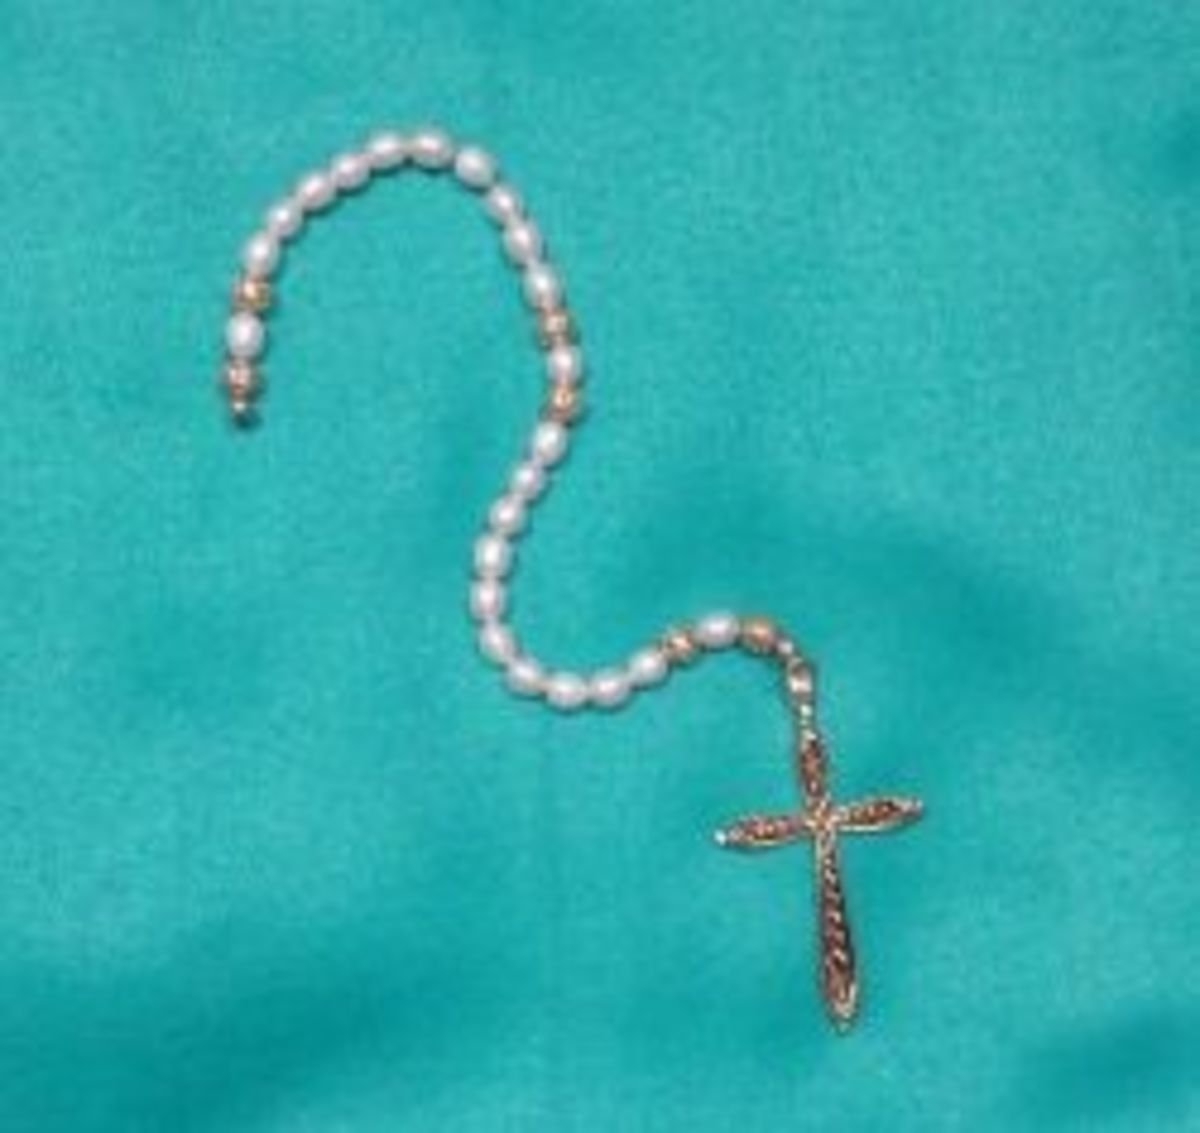 These are my prayer beads I made using freshwater pearls. 